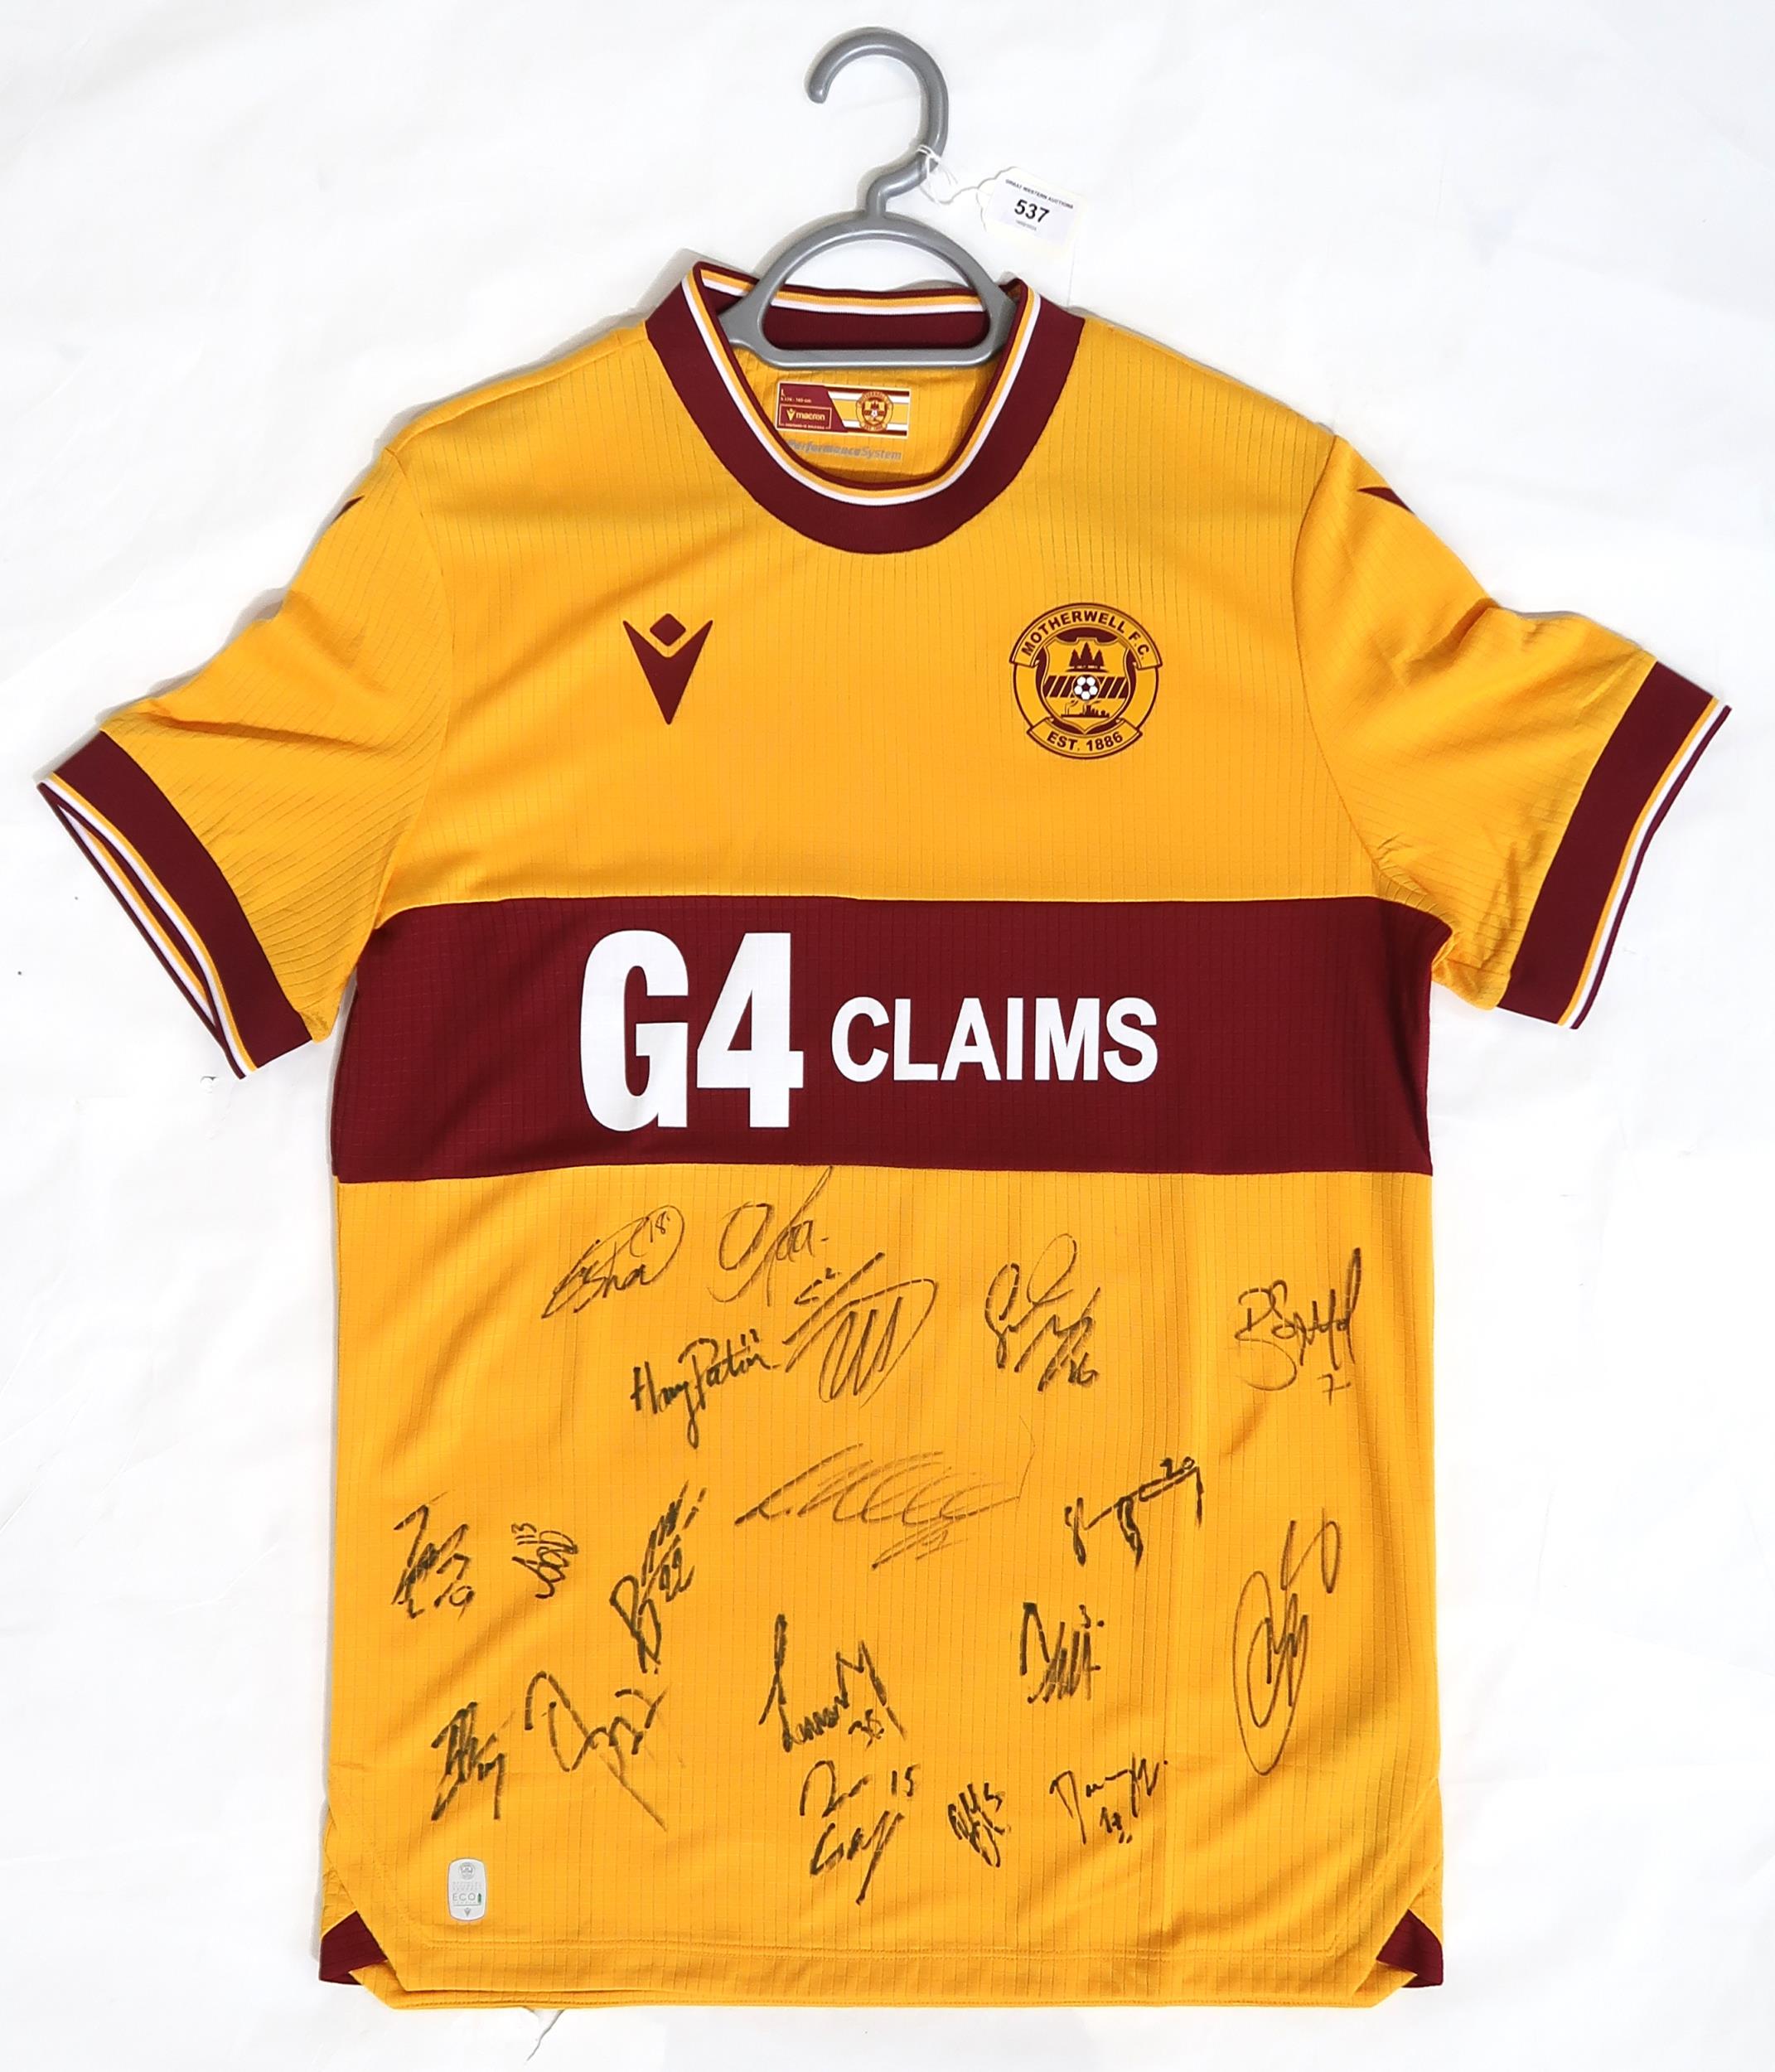 MOTHERWELL F.C. A 2023/24 Men's Home shirt, size L, bearing team signatures Proceeds to benefit Blue